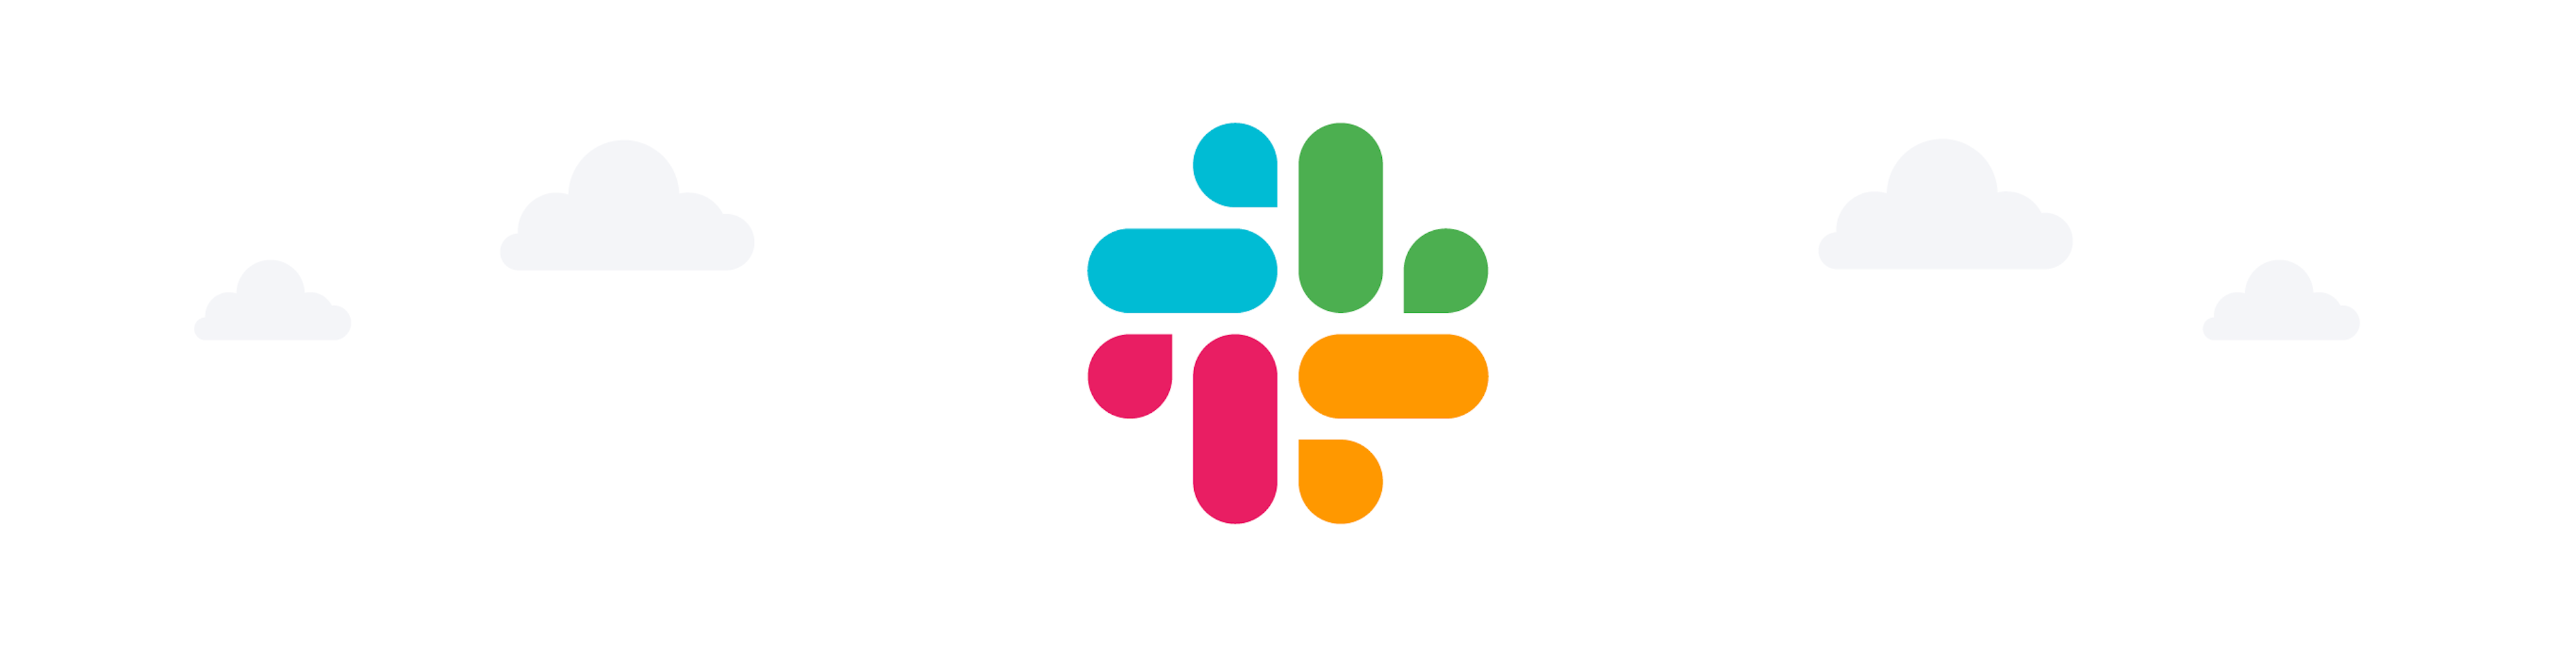 Manage your job applicants with our new Slack integration